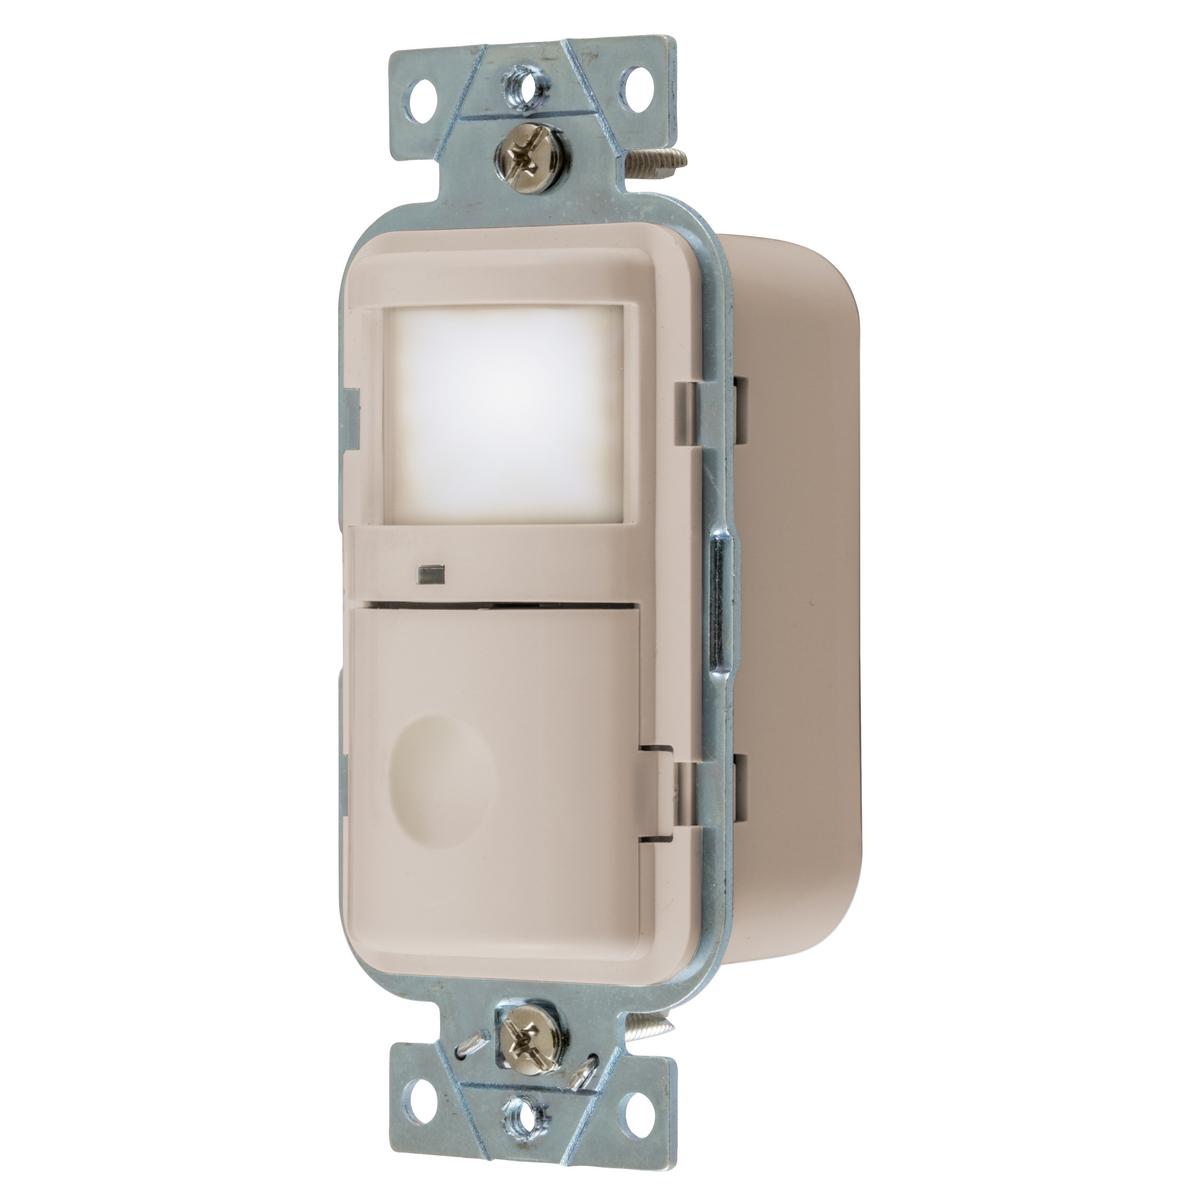 Hubbell WS1000NLA Occupancy Sensors, Wall Switch, PassiveInfrared, 120V 600W, With Night Light, Light Almond  ; With Nightlight ; 